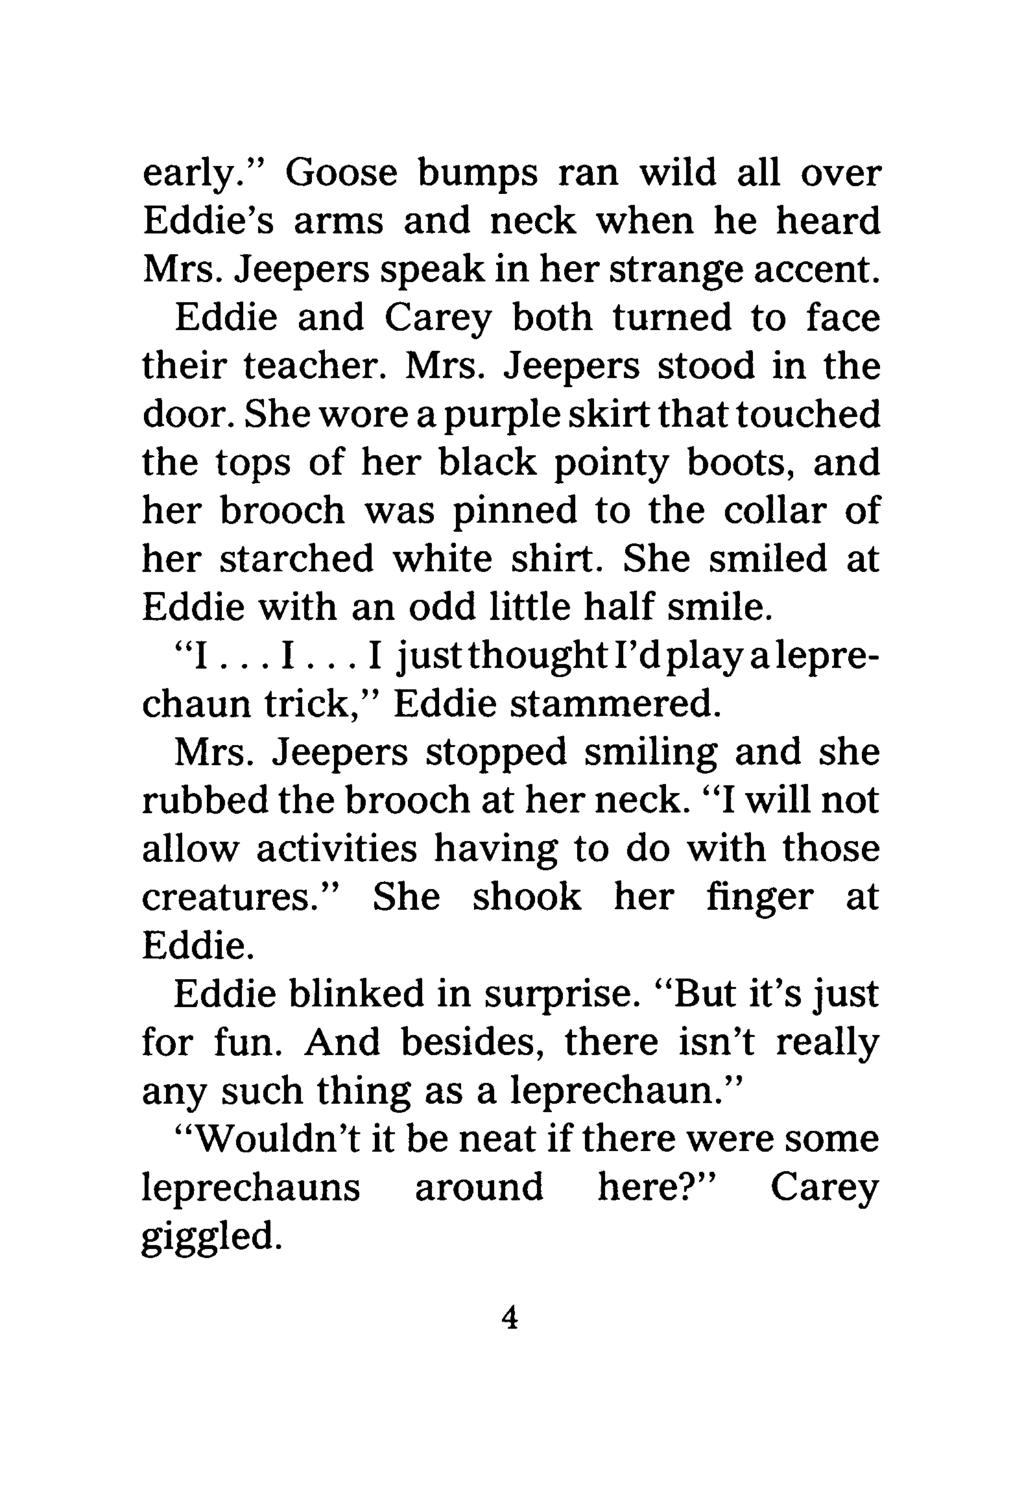 early." Goose bumps ran wild all over Eddie's arms and neck when he heard Mrs. Jeepers speak in her strange accent. Eddie and Carey both turned to face their teacher. Mrs. Jeepers stood in the door.